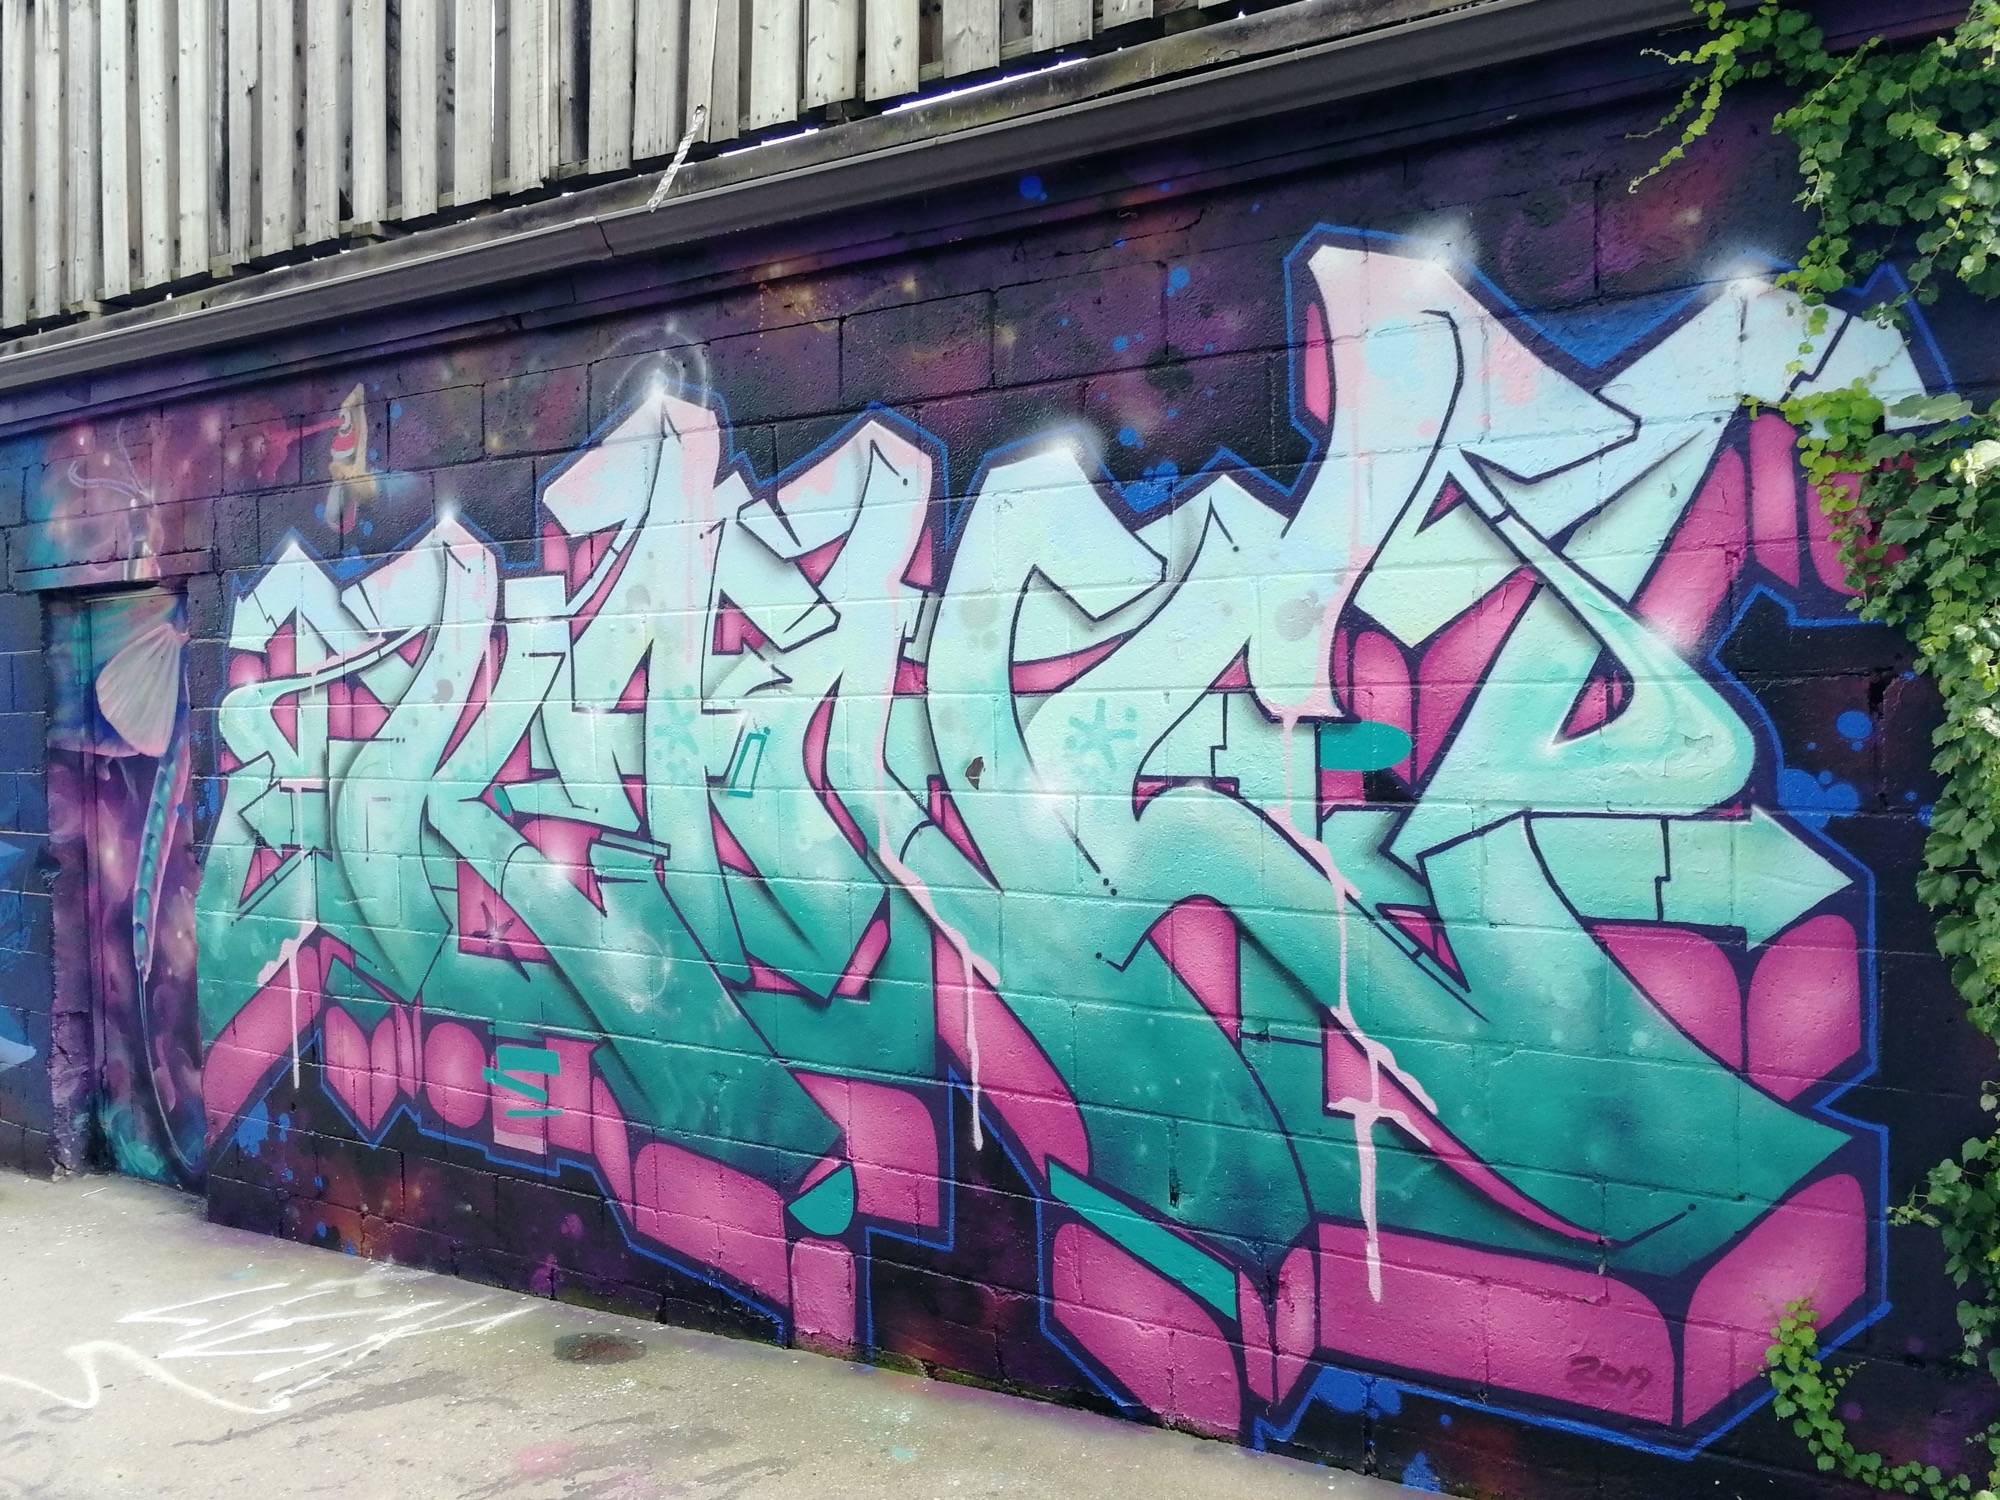 Graffiti 2395  captured by Rabot in Toronto Canada